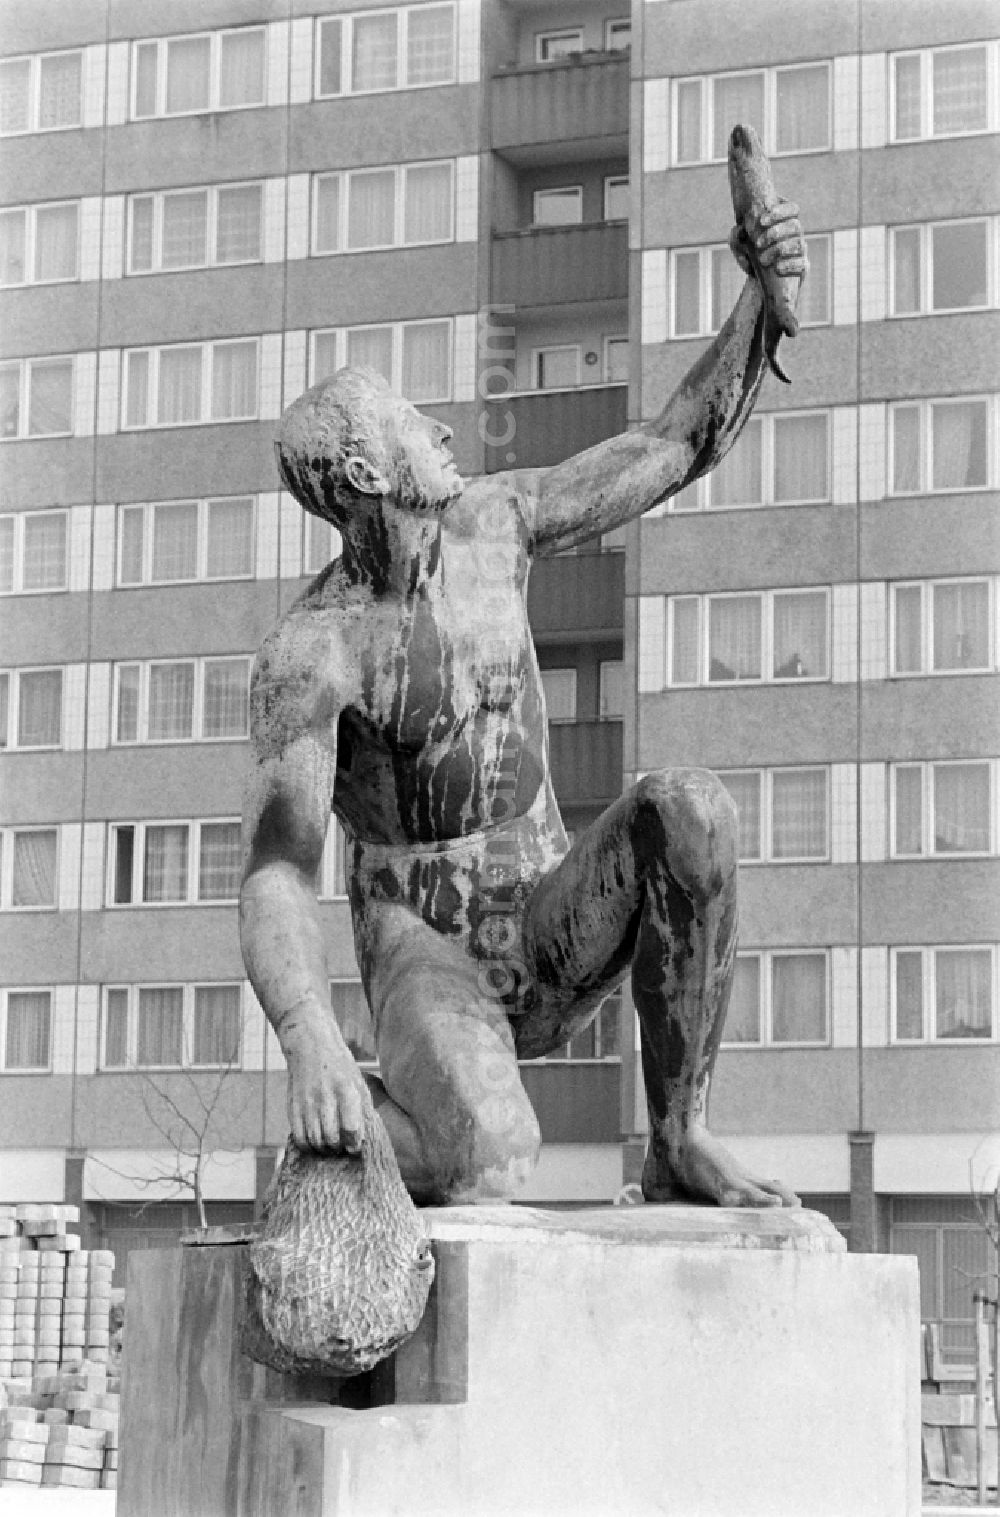 GDR picture archive: Berlin - Fountain with bronze figure Young man with fish by Hans Latt near Frankfurter Allee corner Moellendorffstrasse in Berlin Eastberlin on the territory of the former GDR, German Democratic Republic